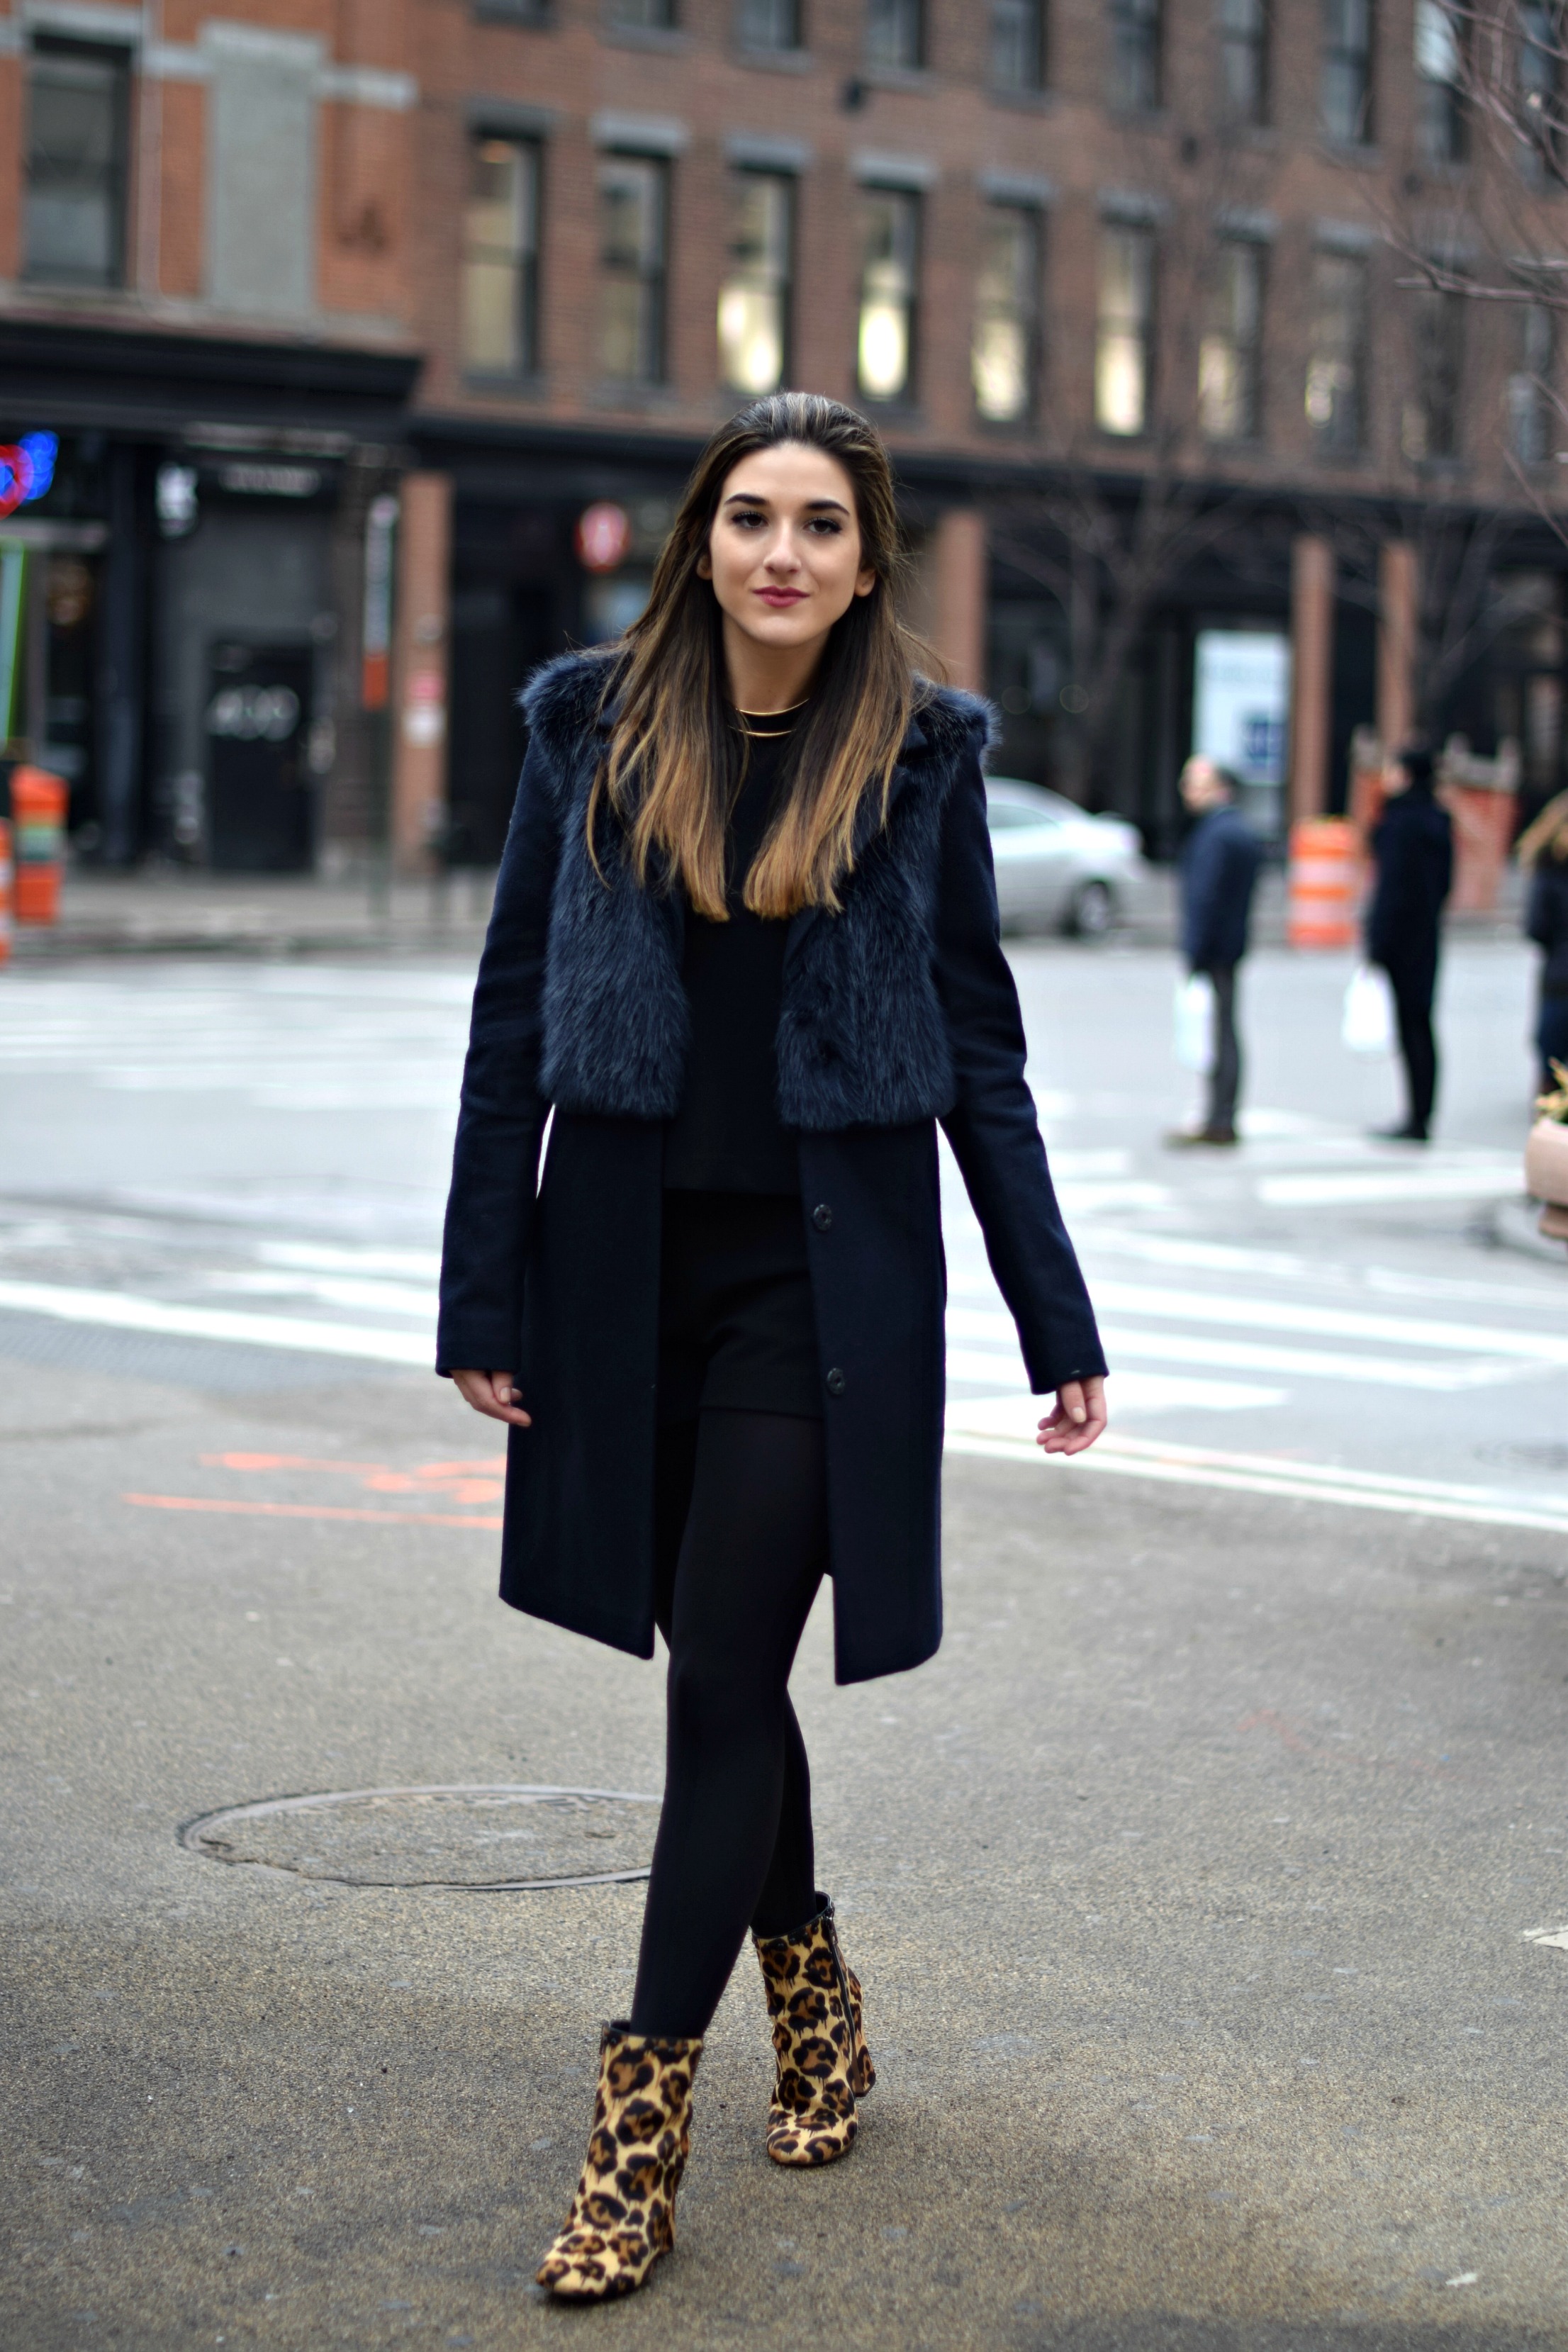 Navy Coat Coach Leopard Booties Louboutins & Love Fashion Blog Esther Santer NYC Street Style Blogger Outfit OOTD Fur Topshop Shopping Girl Women Swag Photoshoot Model Beautiful Winter Inspo NYFW Shoes Tights Ivanka Trump Soho Tote City Hair Lifestyle.jpg